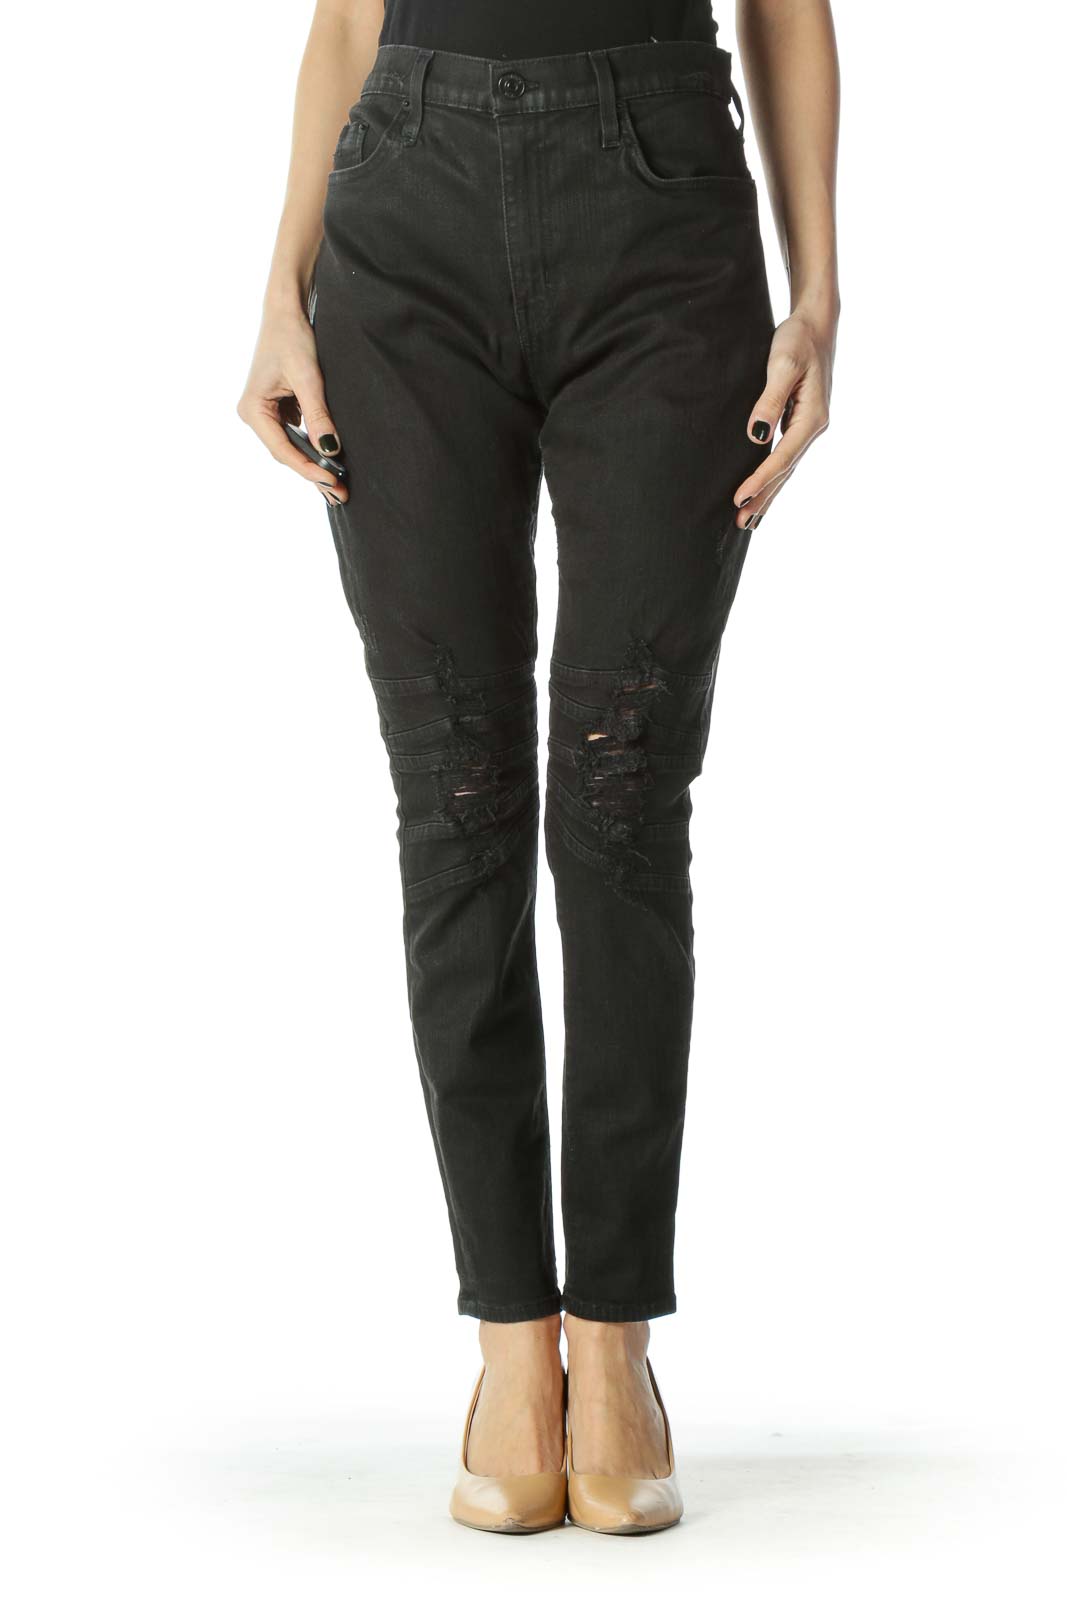 Black Distressed Textured Stretch Skinny Jeans Front